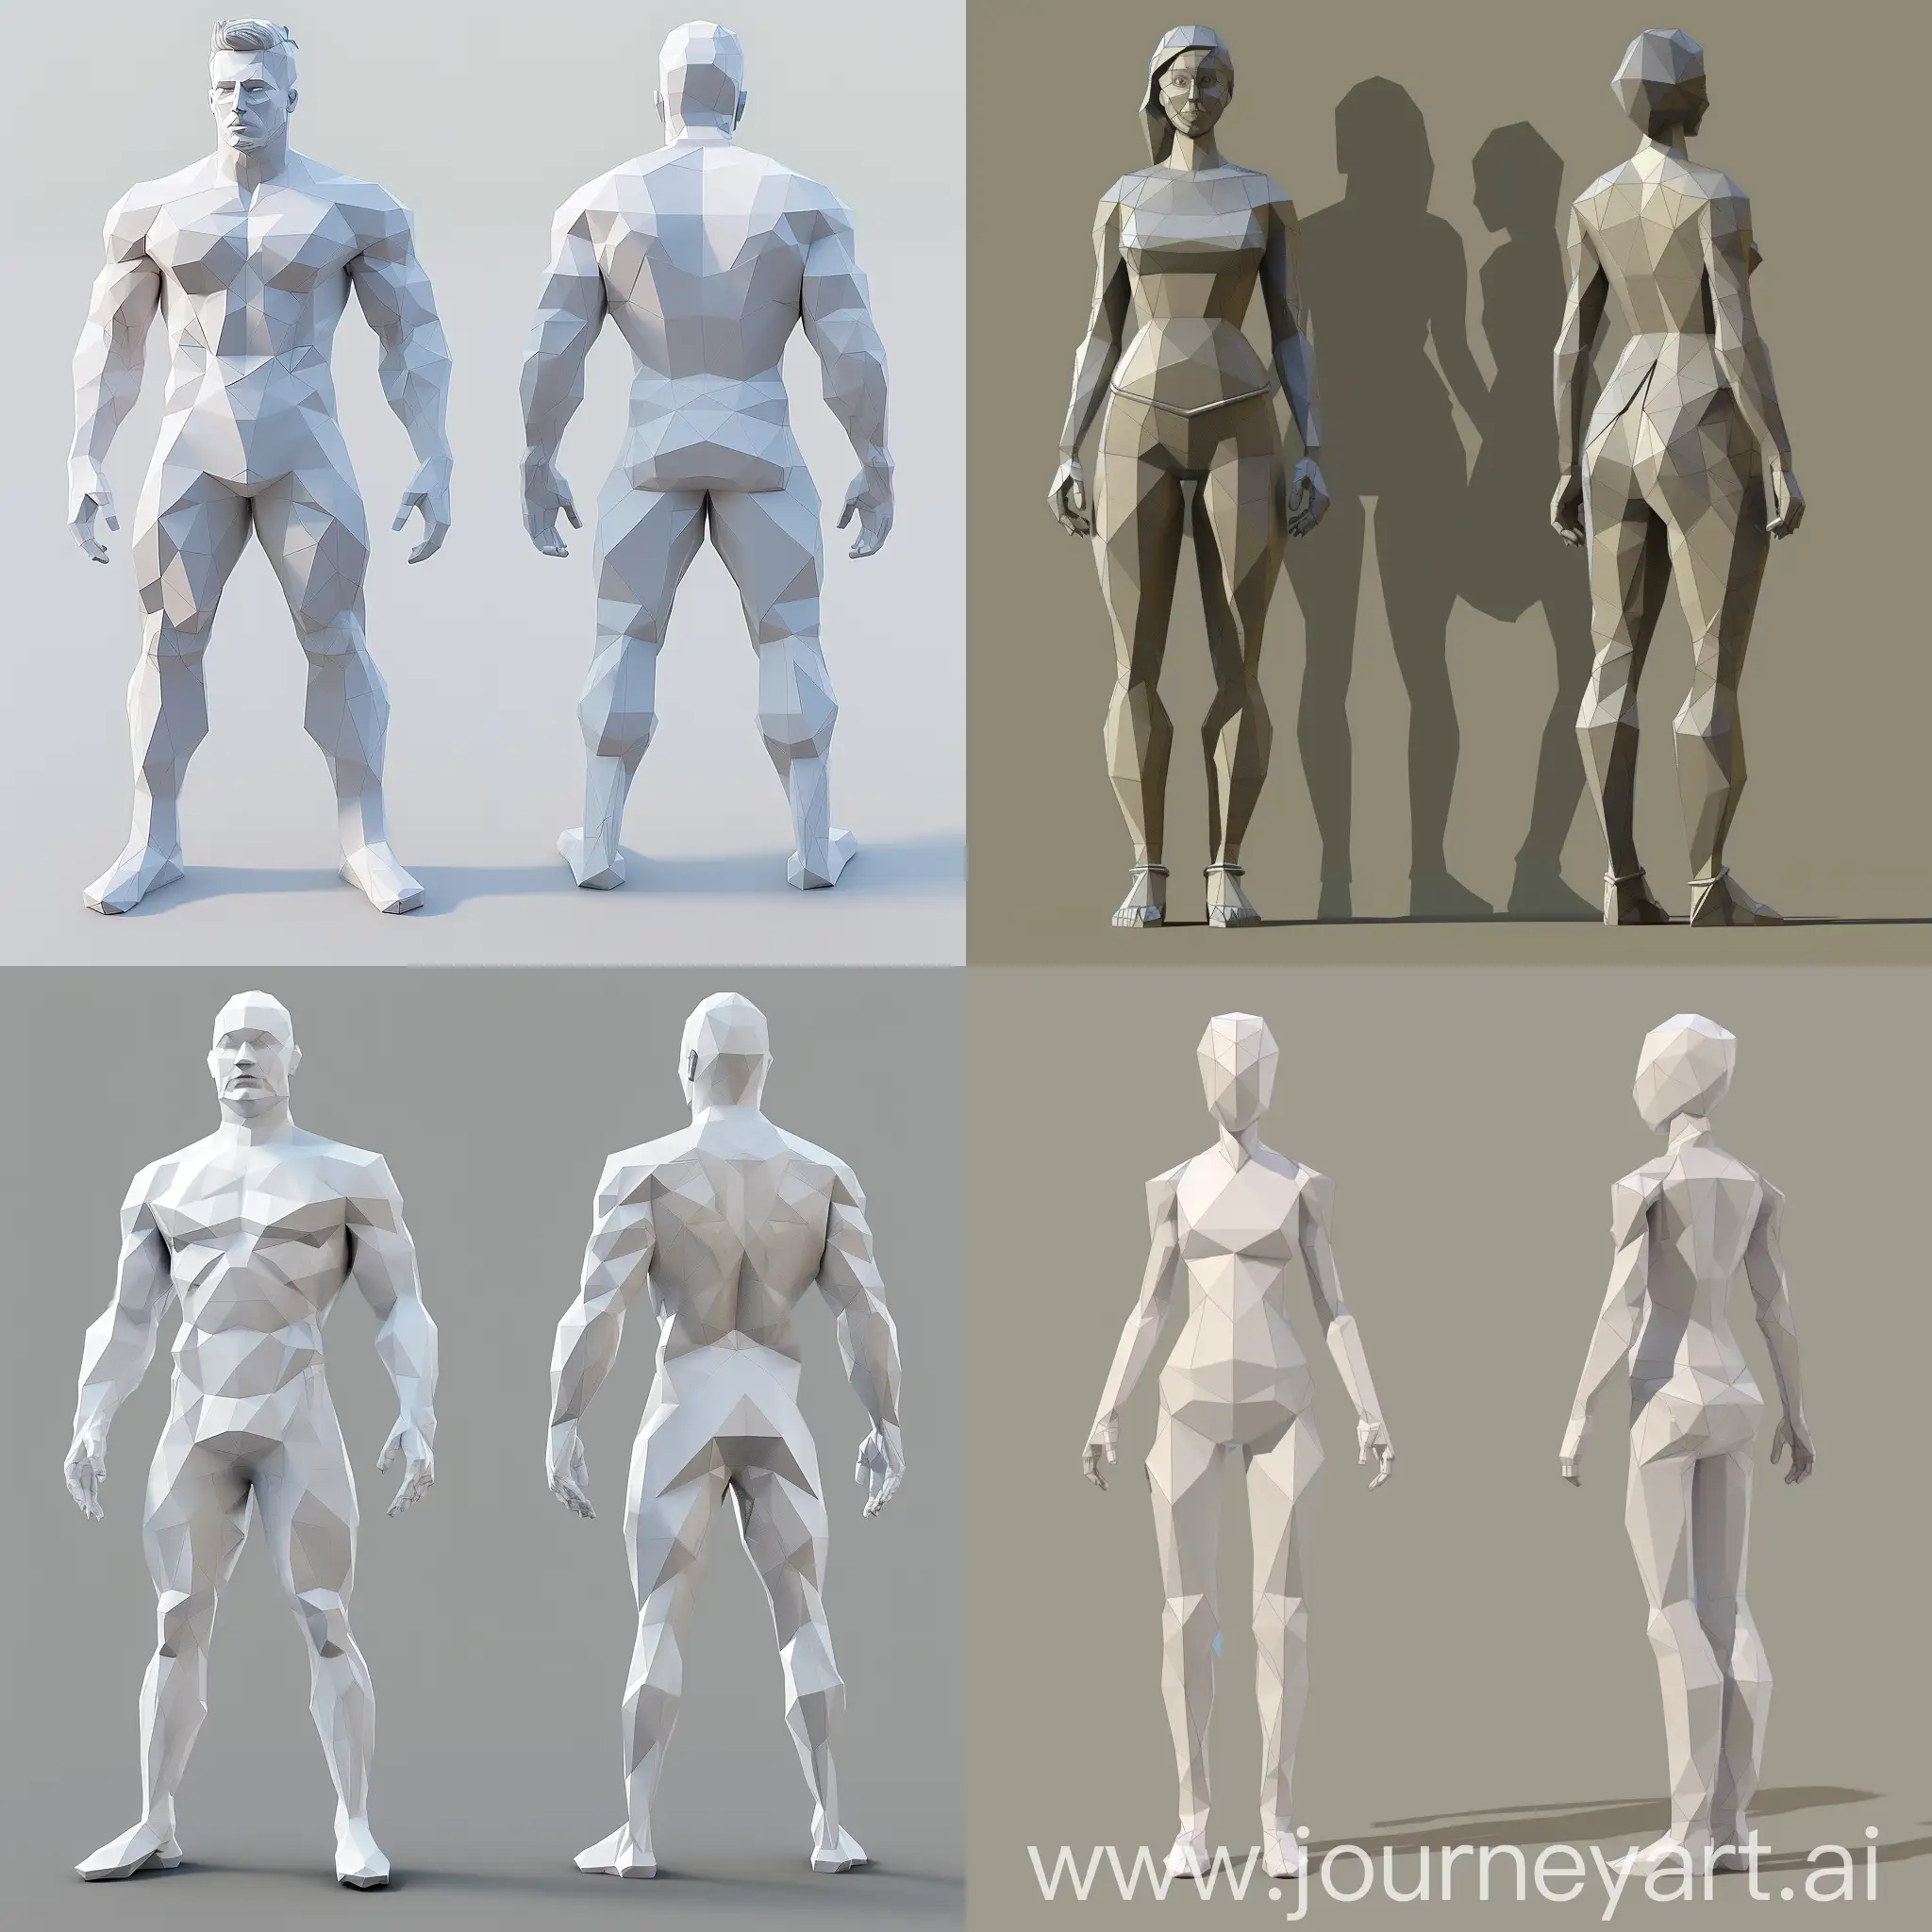 low poly (must maximum 500 tris) character blender reference front and side full body. Please note that the front side and exactly the right side (I want to use a mirror in the centre) both sides have equal image sizes and are one image with polylines, no light effect no colour, and no shadow.